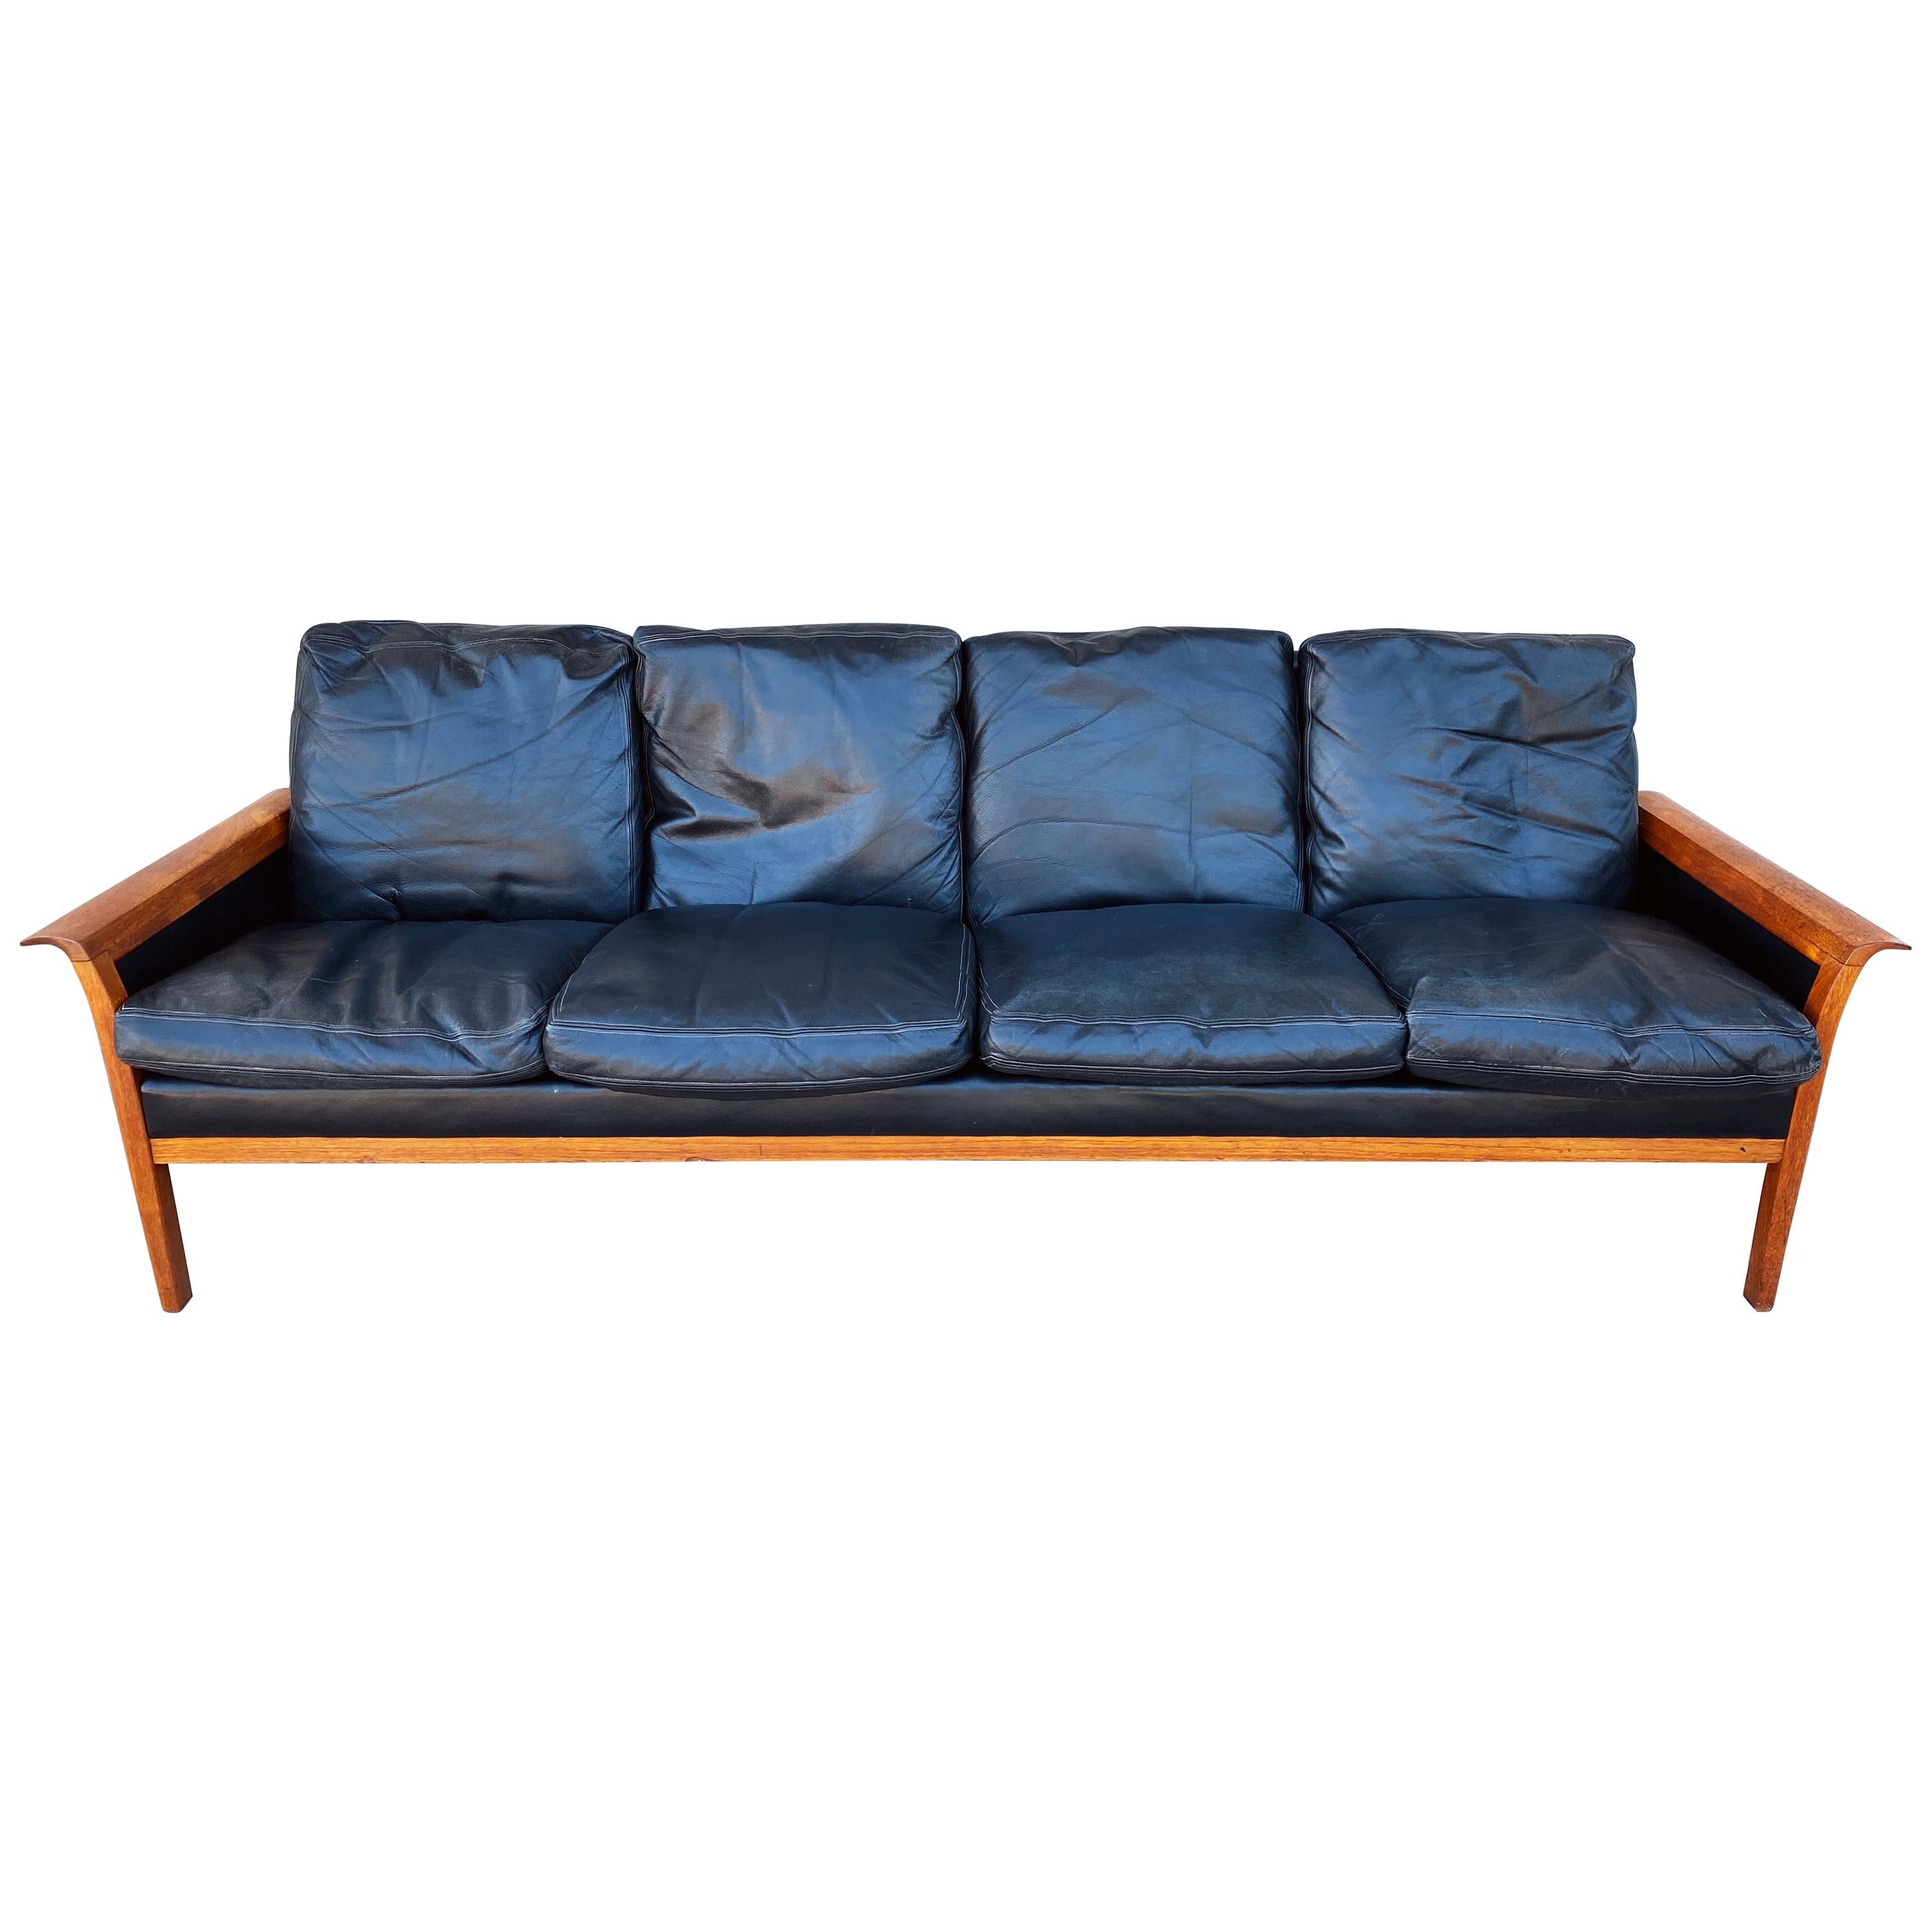 Vintage Teak and Leather 4-Seat Sofa by Knut Saeter for Vatne Mobler circa 1960s